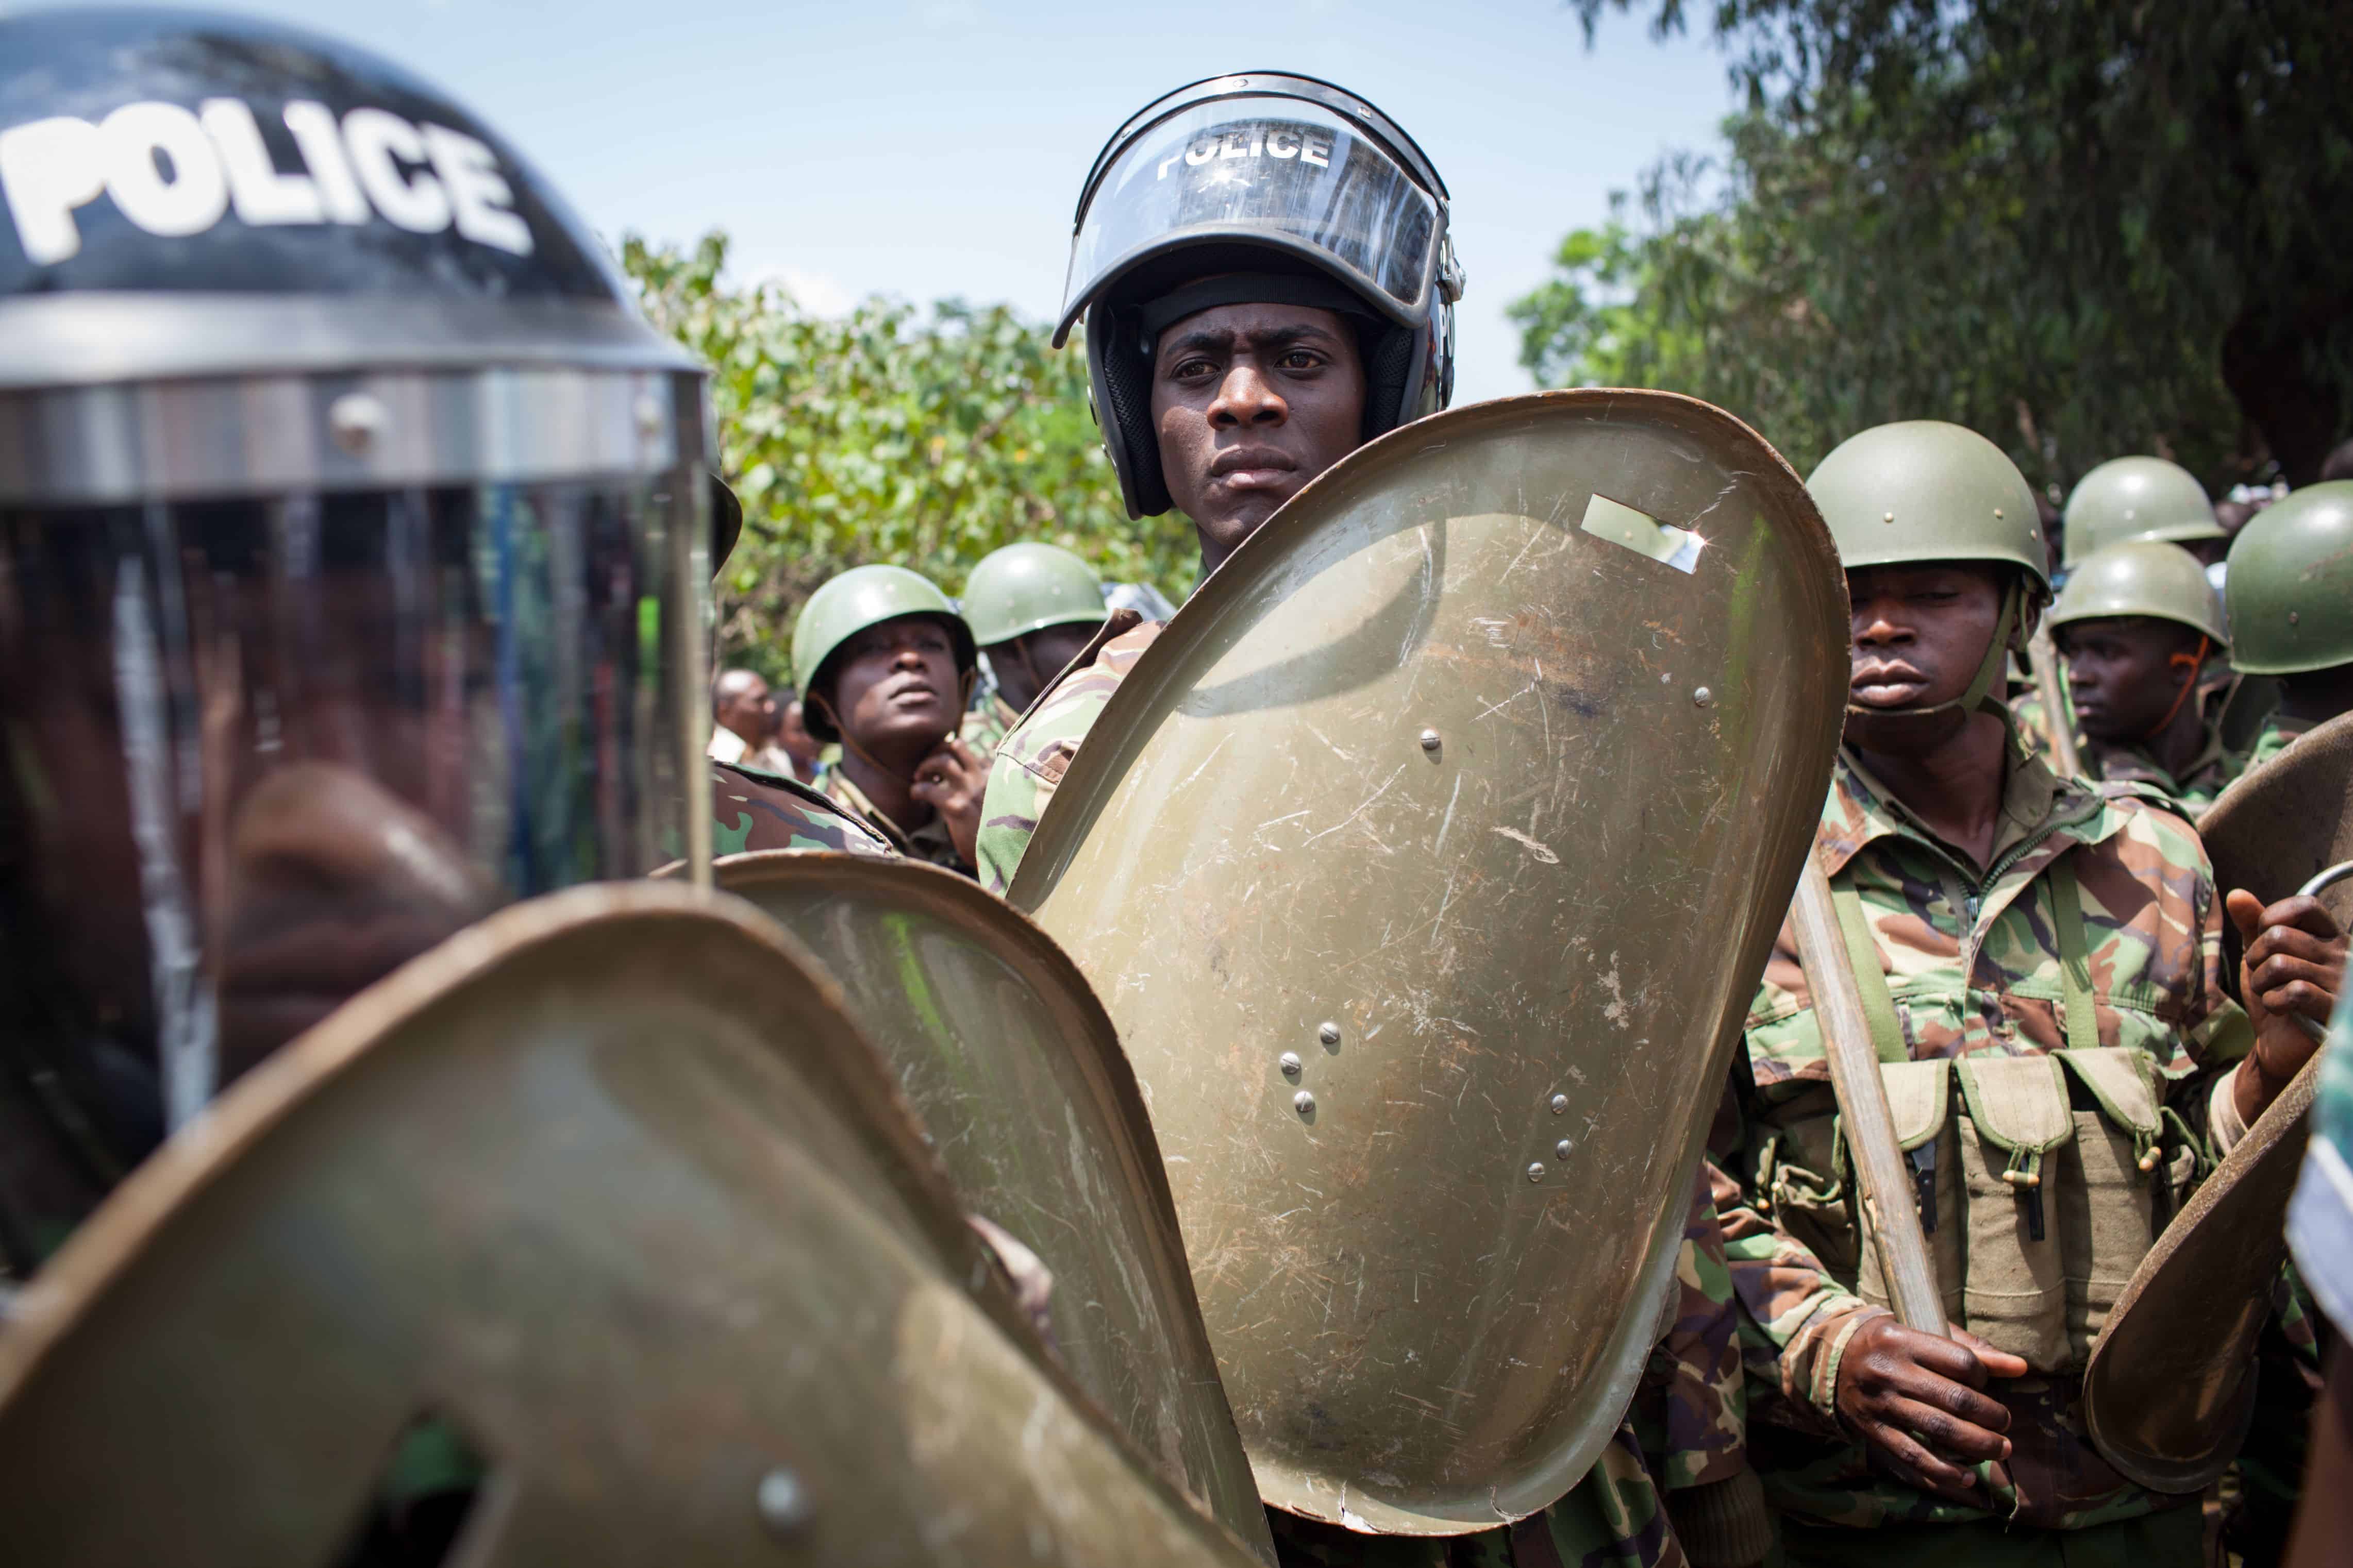 Nairobi, Kenya - February 13, 2014: Color picture of a policemen holding shields